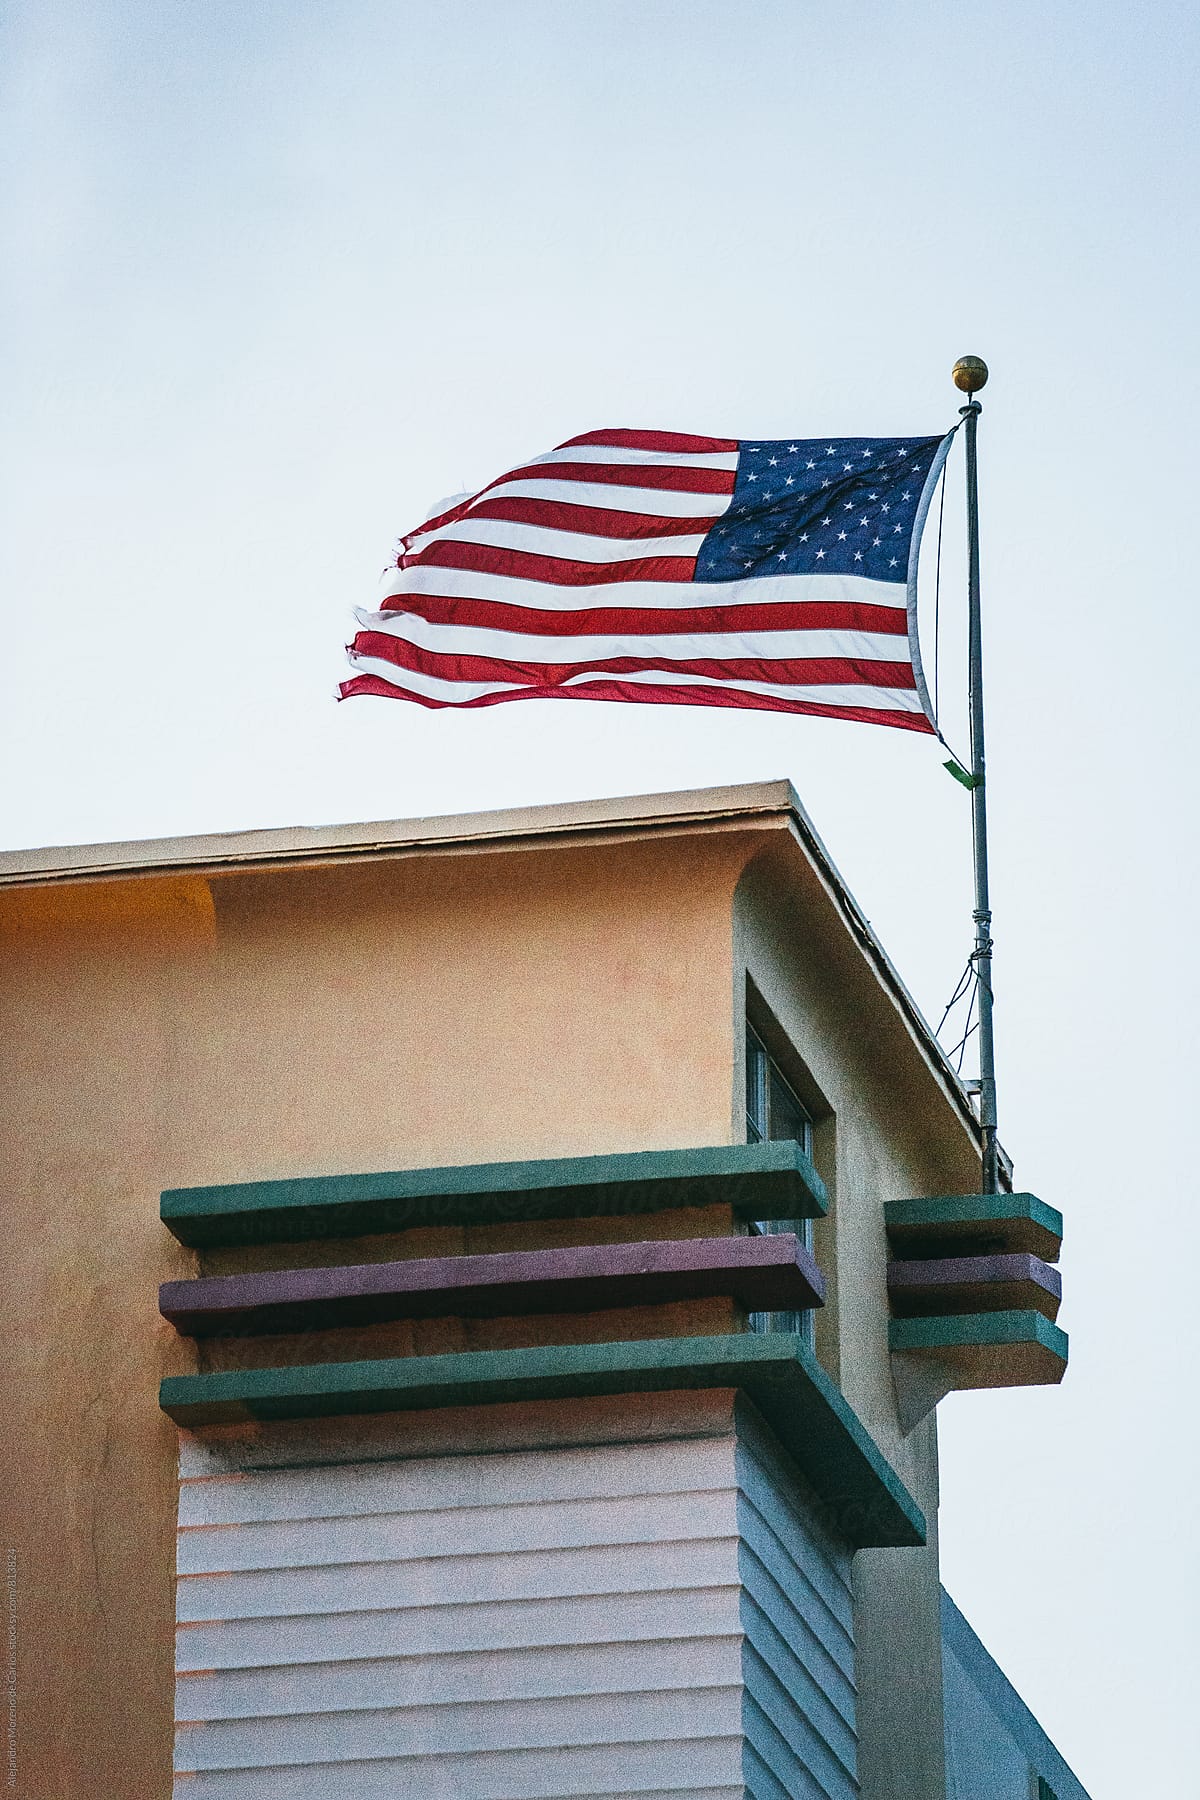 View of a an american flag flying in the wind on top of a building